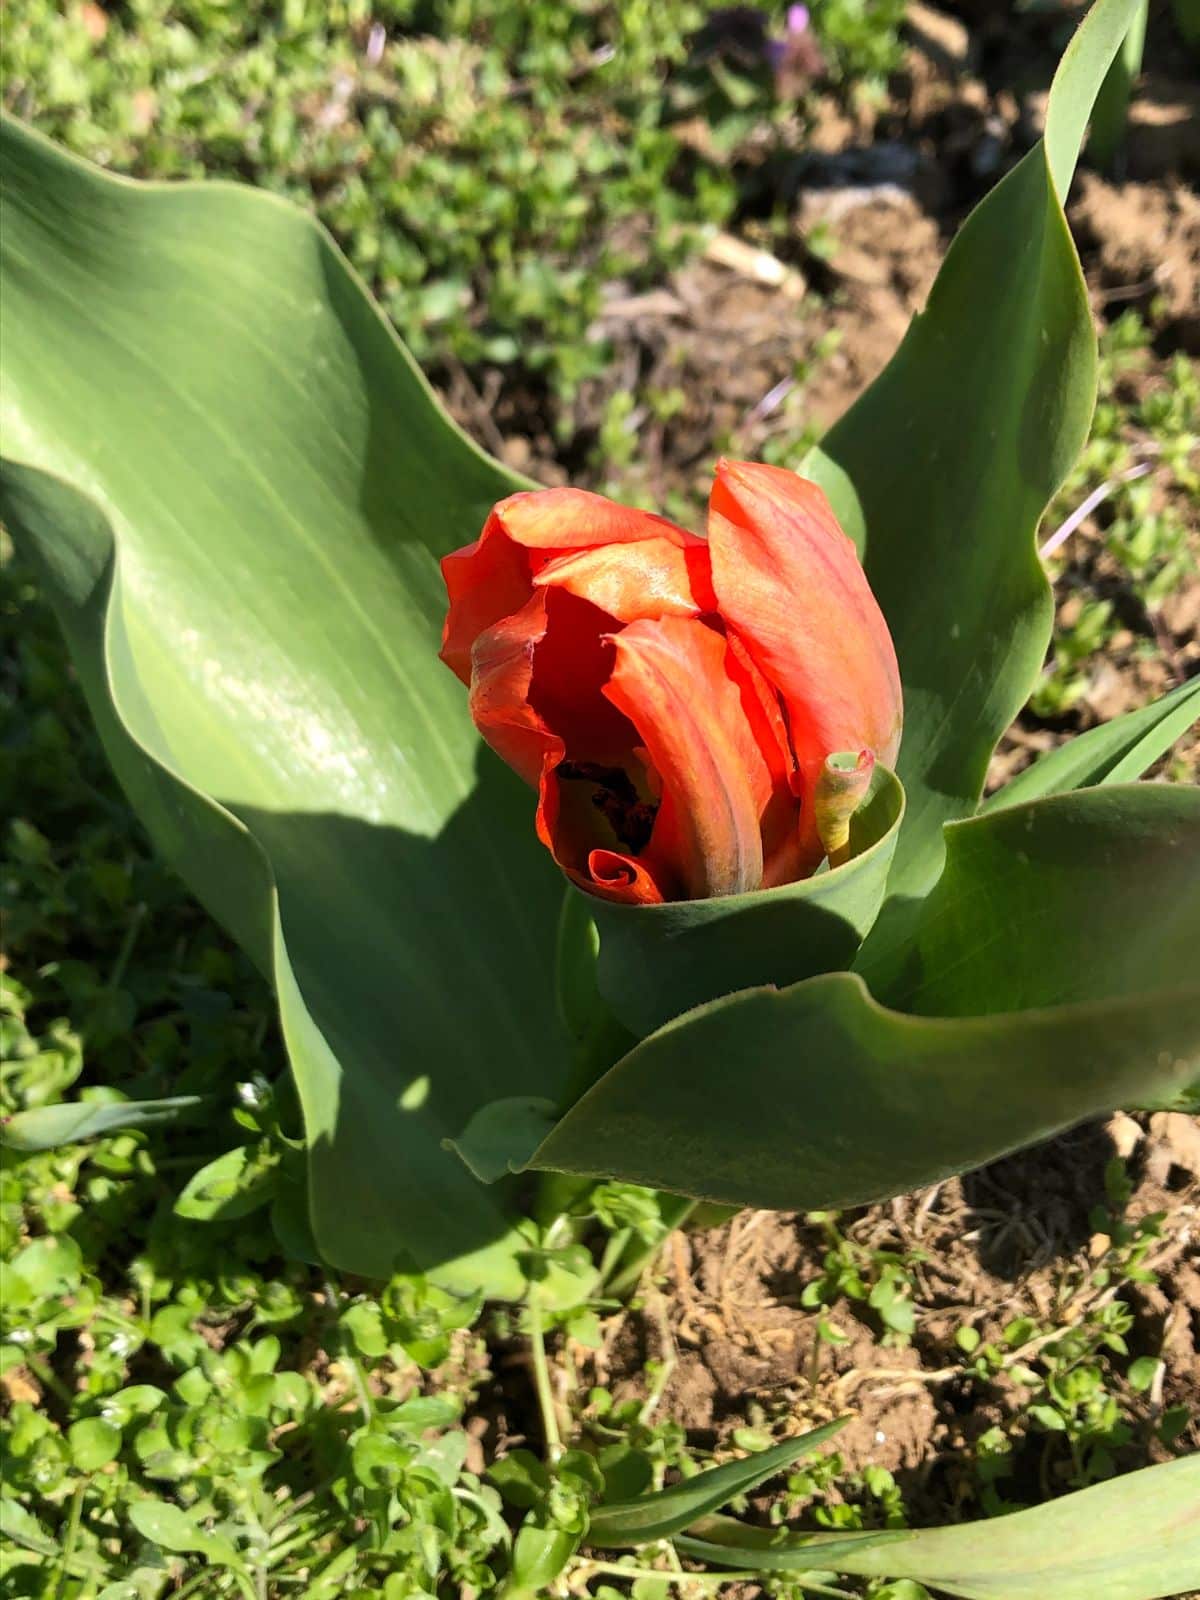 A daffodil that survived chewing winter pests